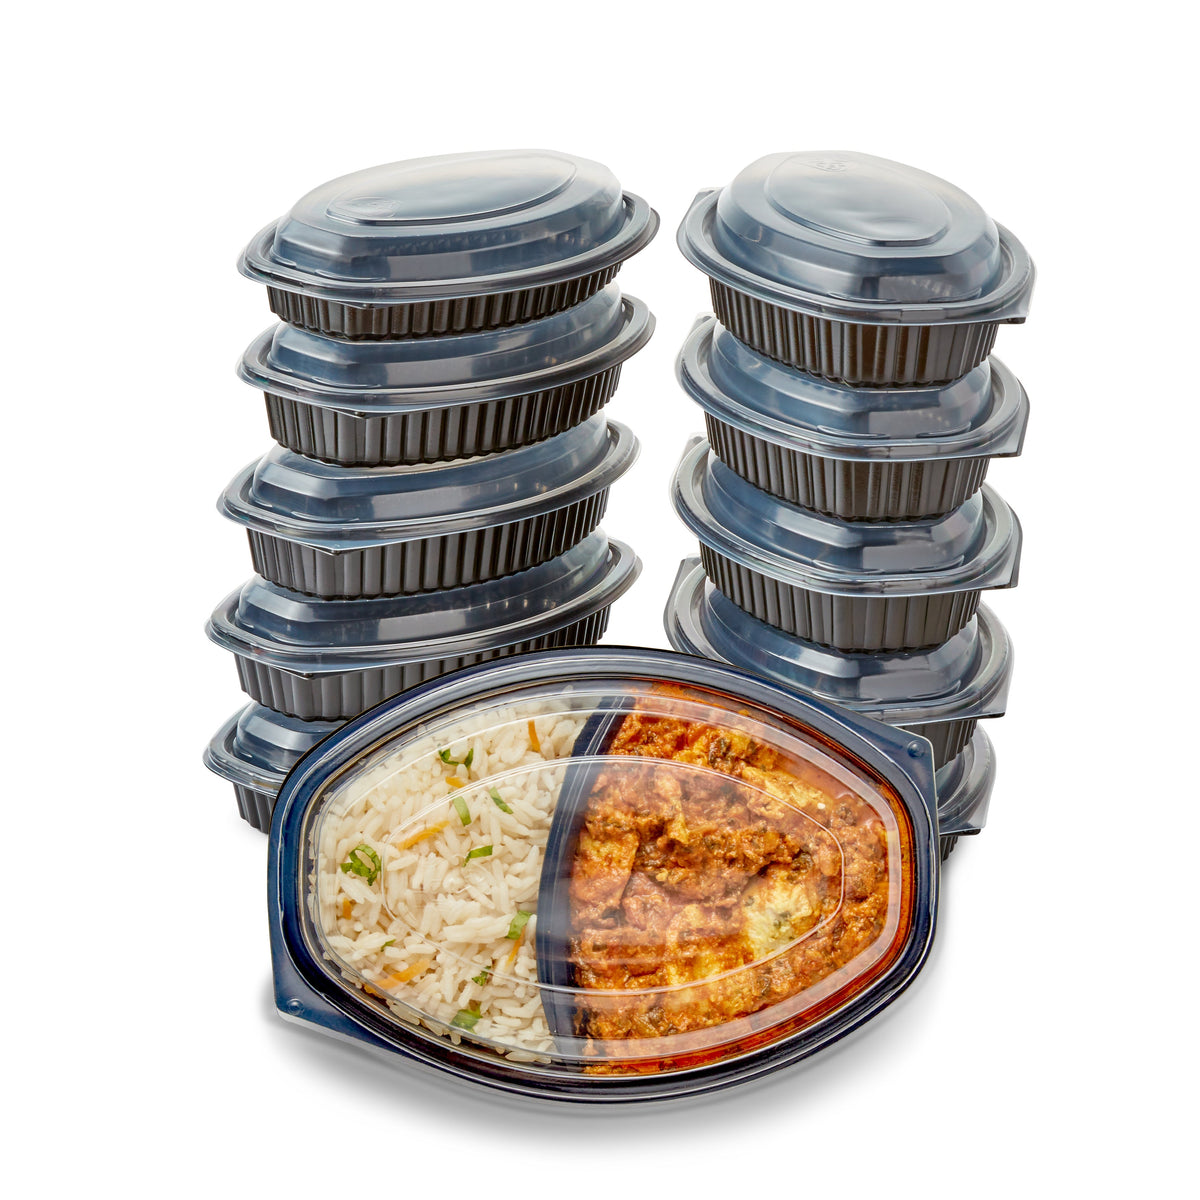 30 x 560 ml (19.8 ounce) Microwavable Twin Hot Food Meal Prep Trays & Lids (207mm x 143mm x 59mm)